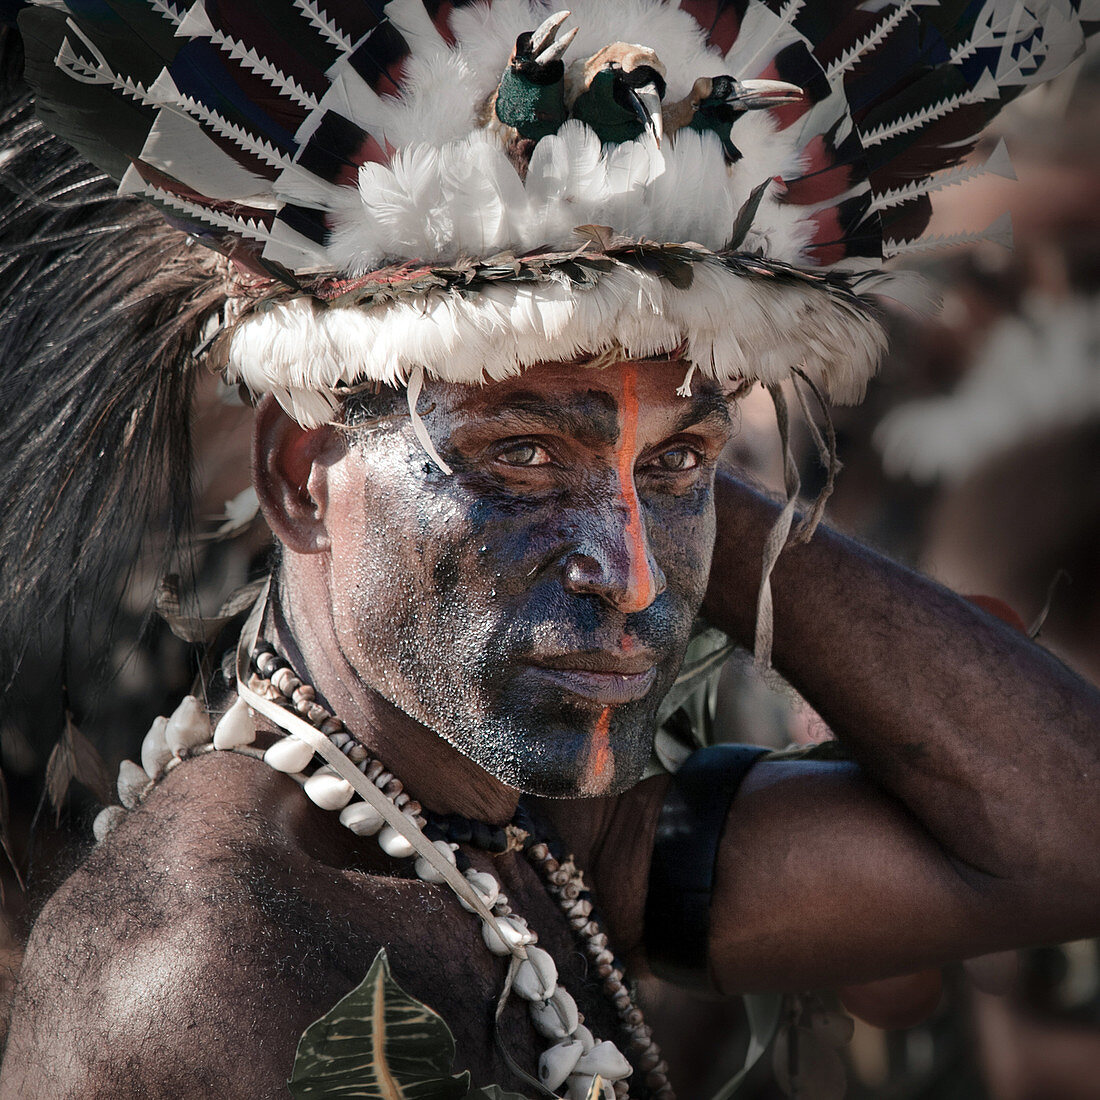 Alotau, Papua New Guinea - November 6, 2010: A man with tribal face painting is wearing hat with feathers at the Kenu and Kundu Canoe Festival.